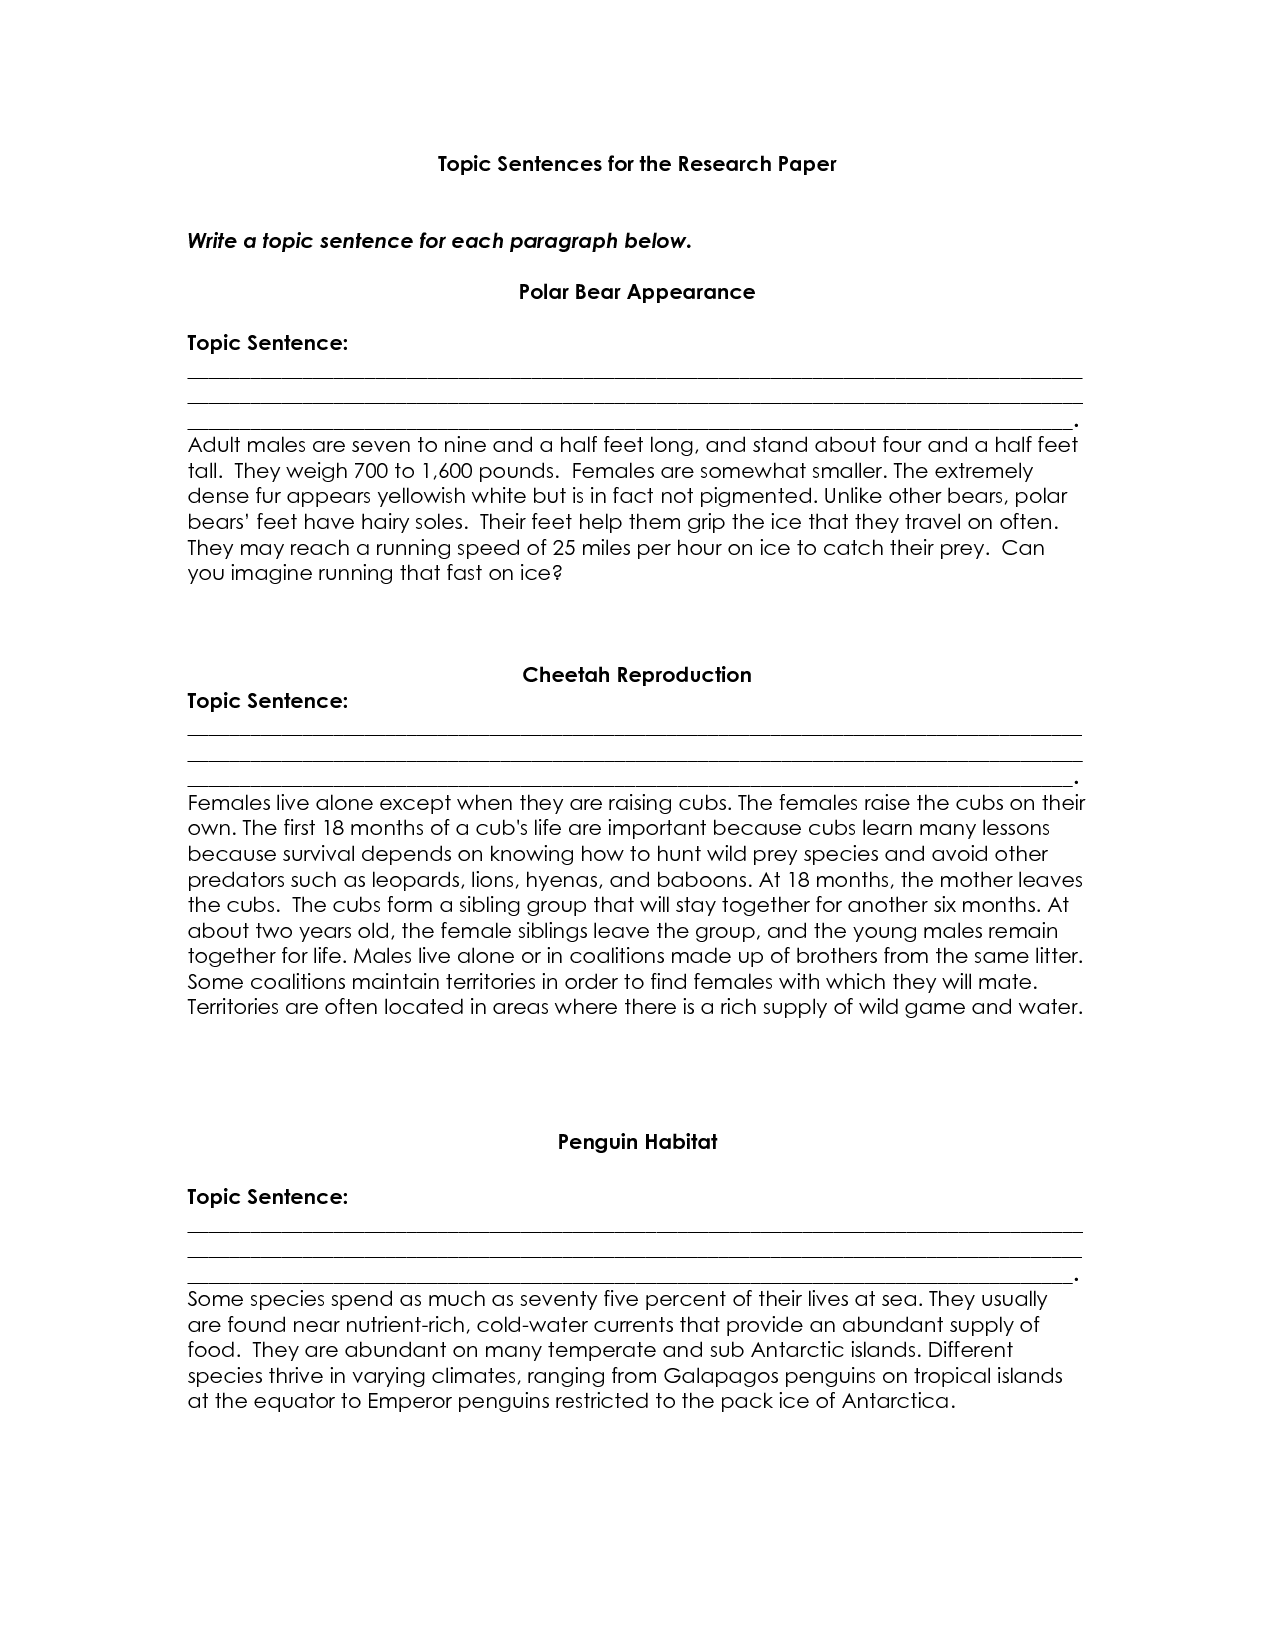 16-best-images-of-topic-sentences-worksheets-pdf-writing-topic